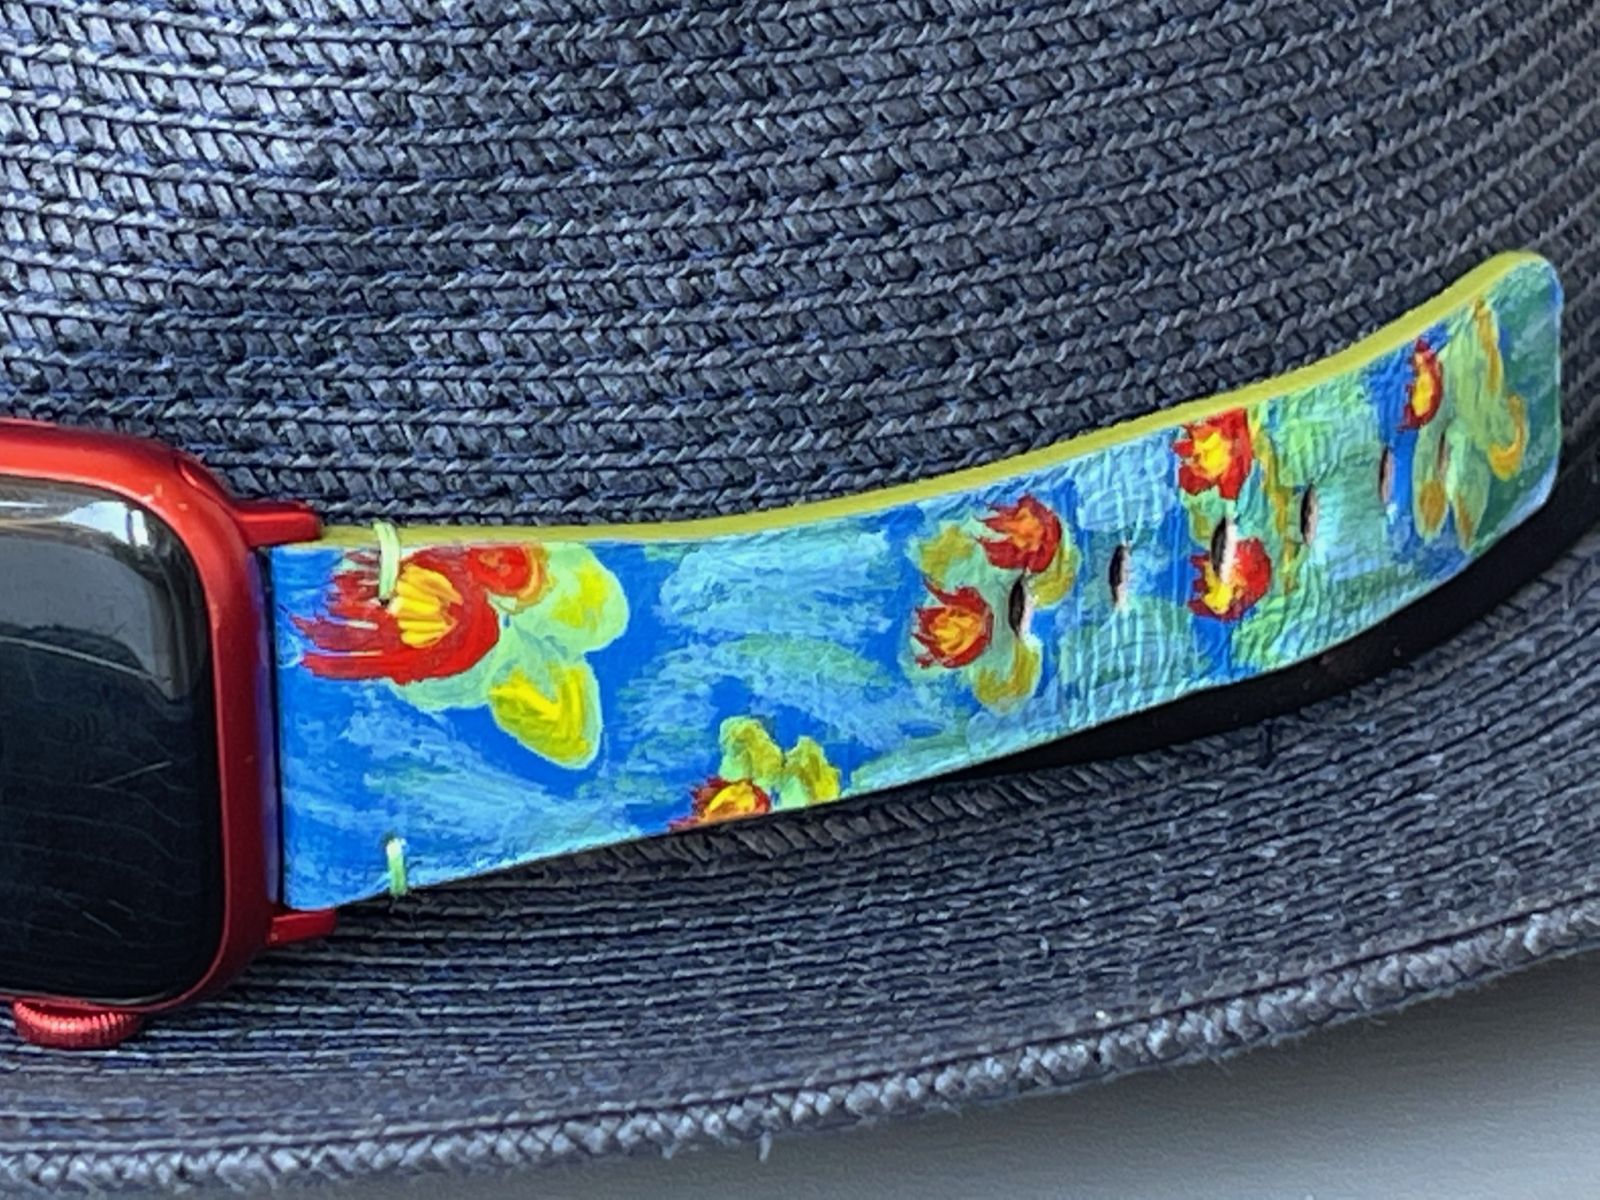 ART Affection: Hand-Painted Band for Apple Watch Inspired by Monet's Water Lilies